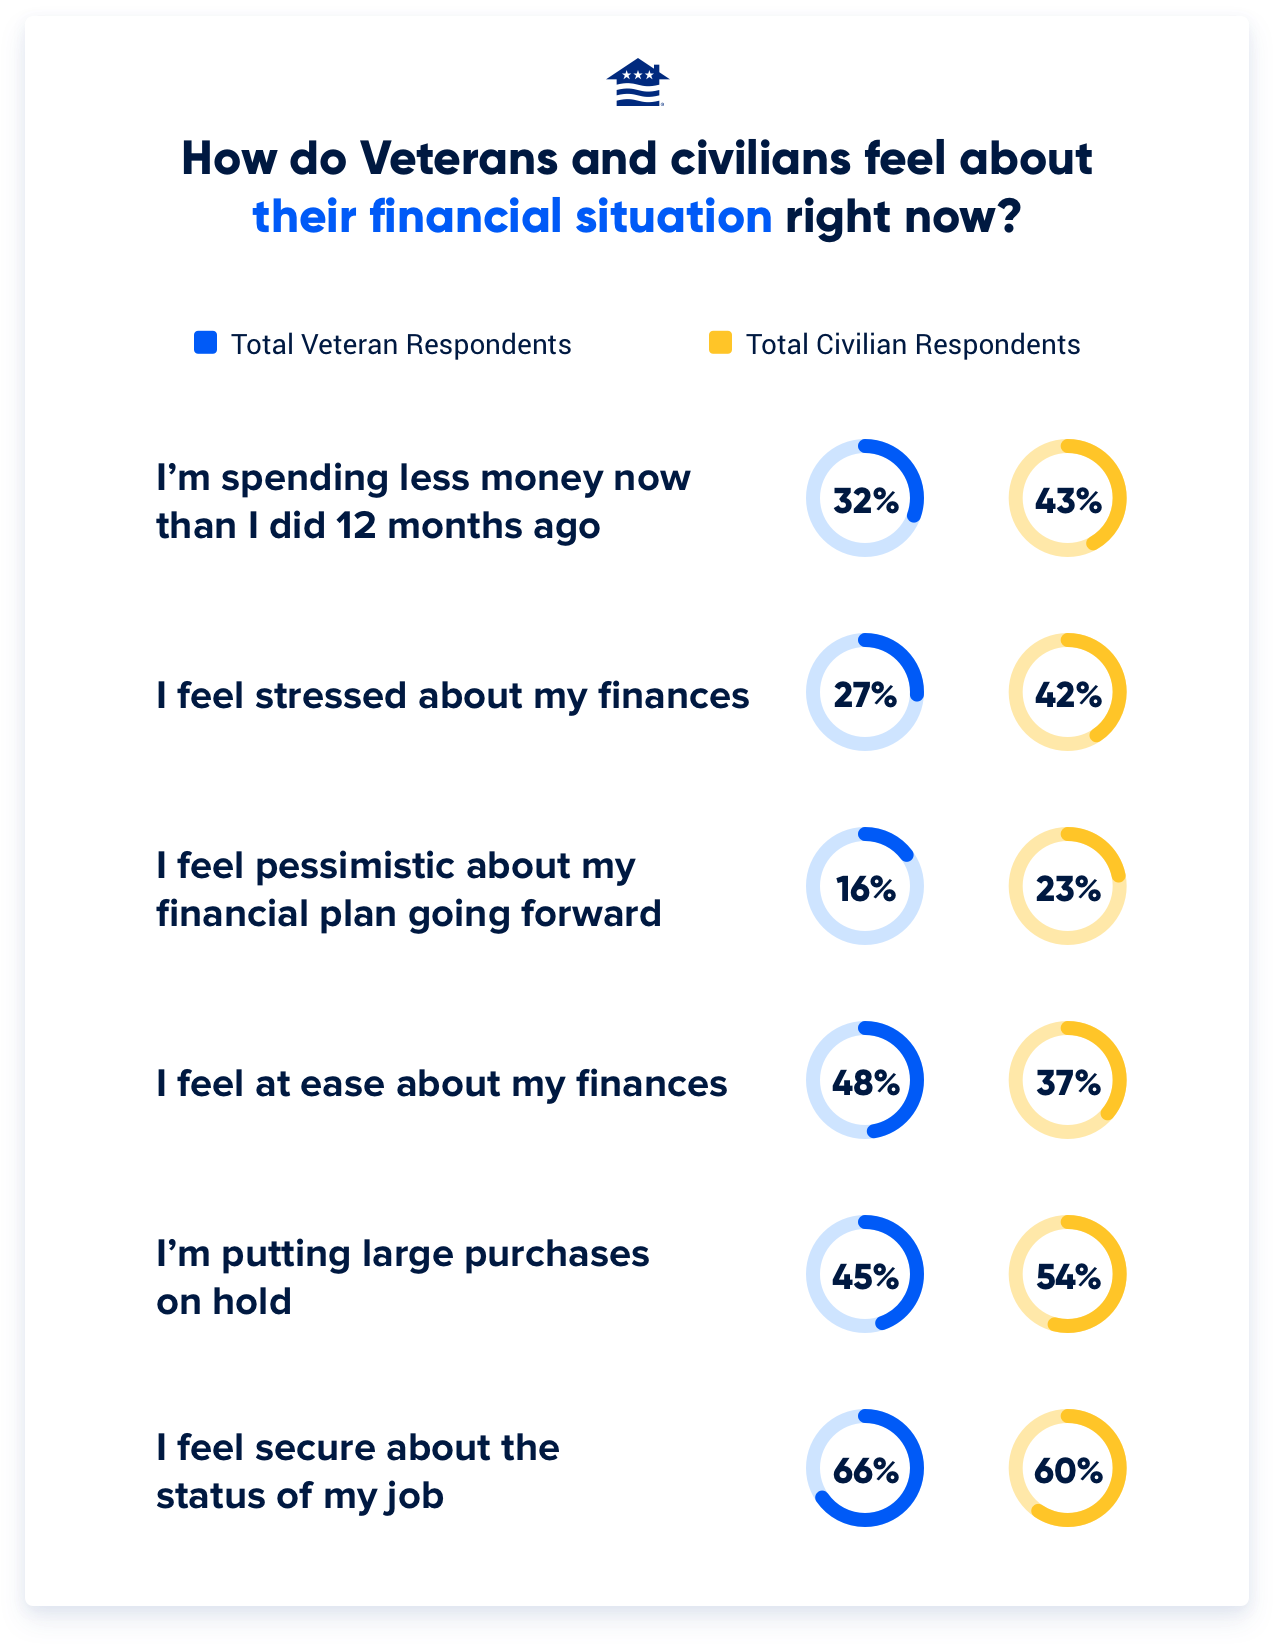 Veterans (Q3) Civilians (Q3) I'm spending less money now than I did 12 months ago 32% 43% I feel stressed about my finances 27% 42% I feel pessimistic about my financial plan going forward 16% 23% I feel at ease about my finances 48% 37% I’m putting large purchases on hold 45% 54% I feel secure about the status of my job 66% 60%